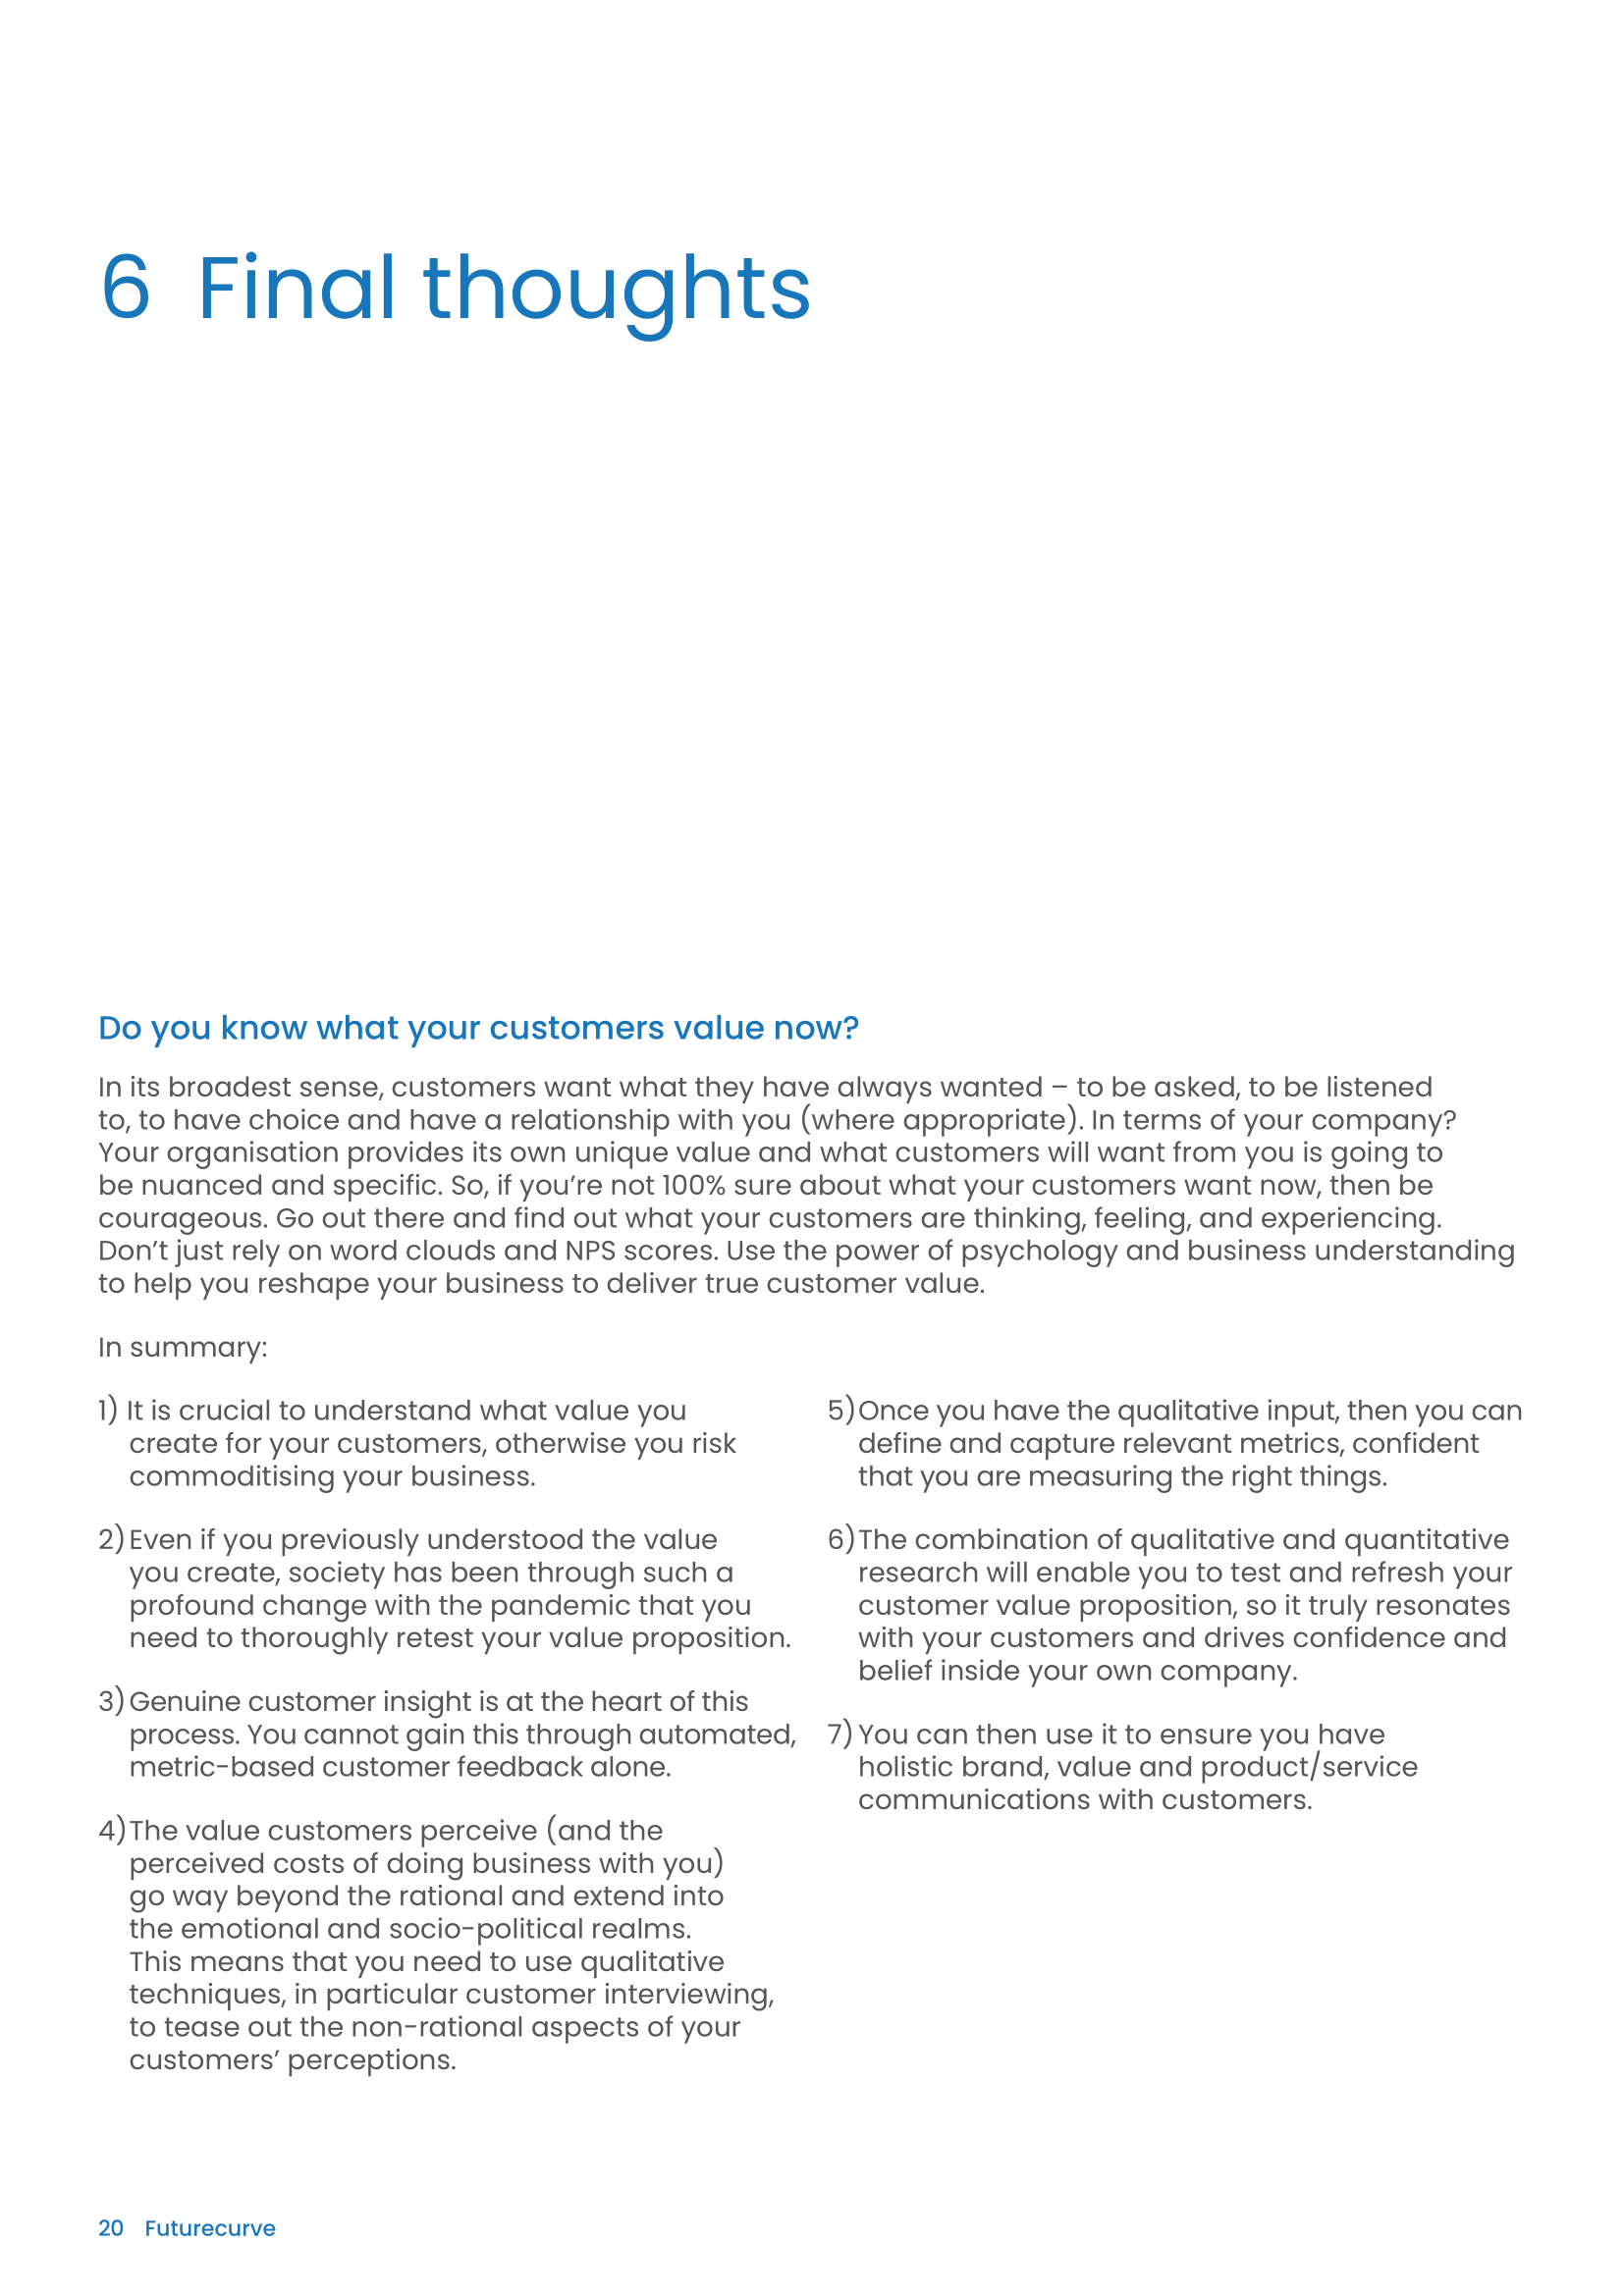 What do customers want now - A Futurecurve White Paper (2) (1)-20